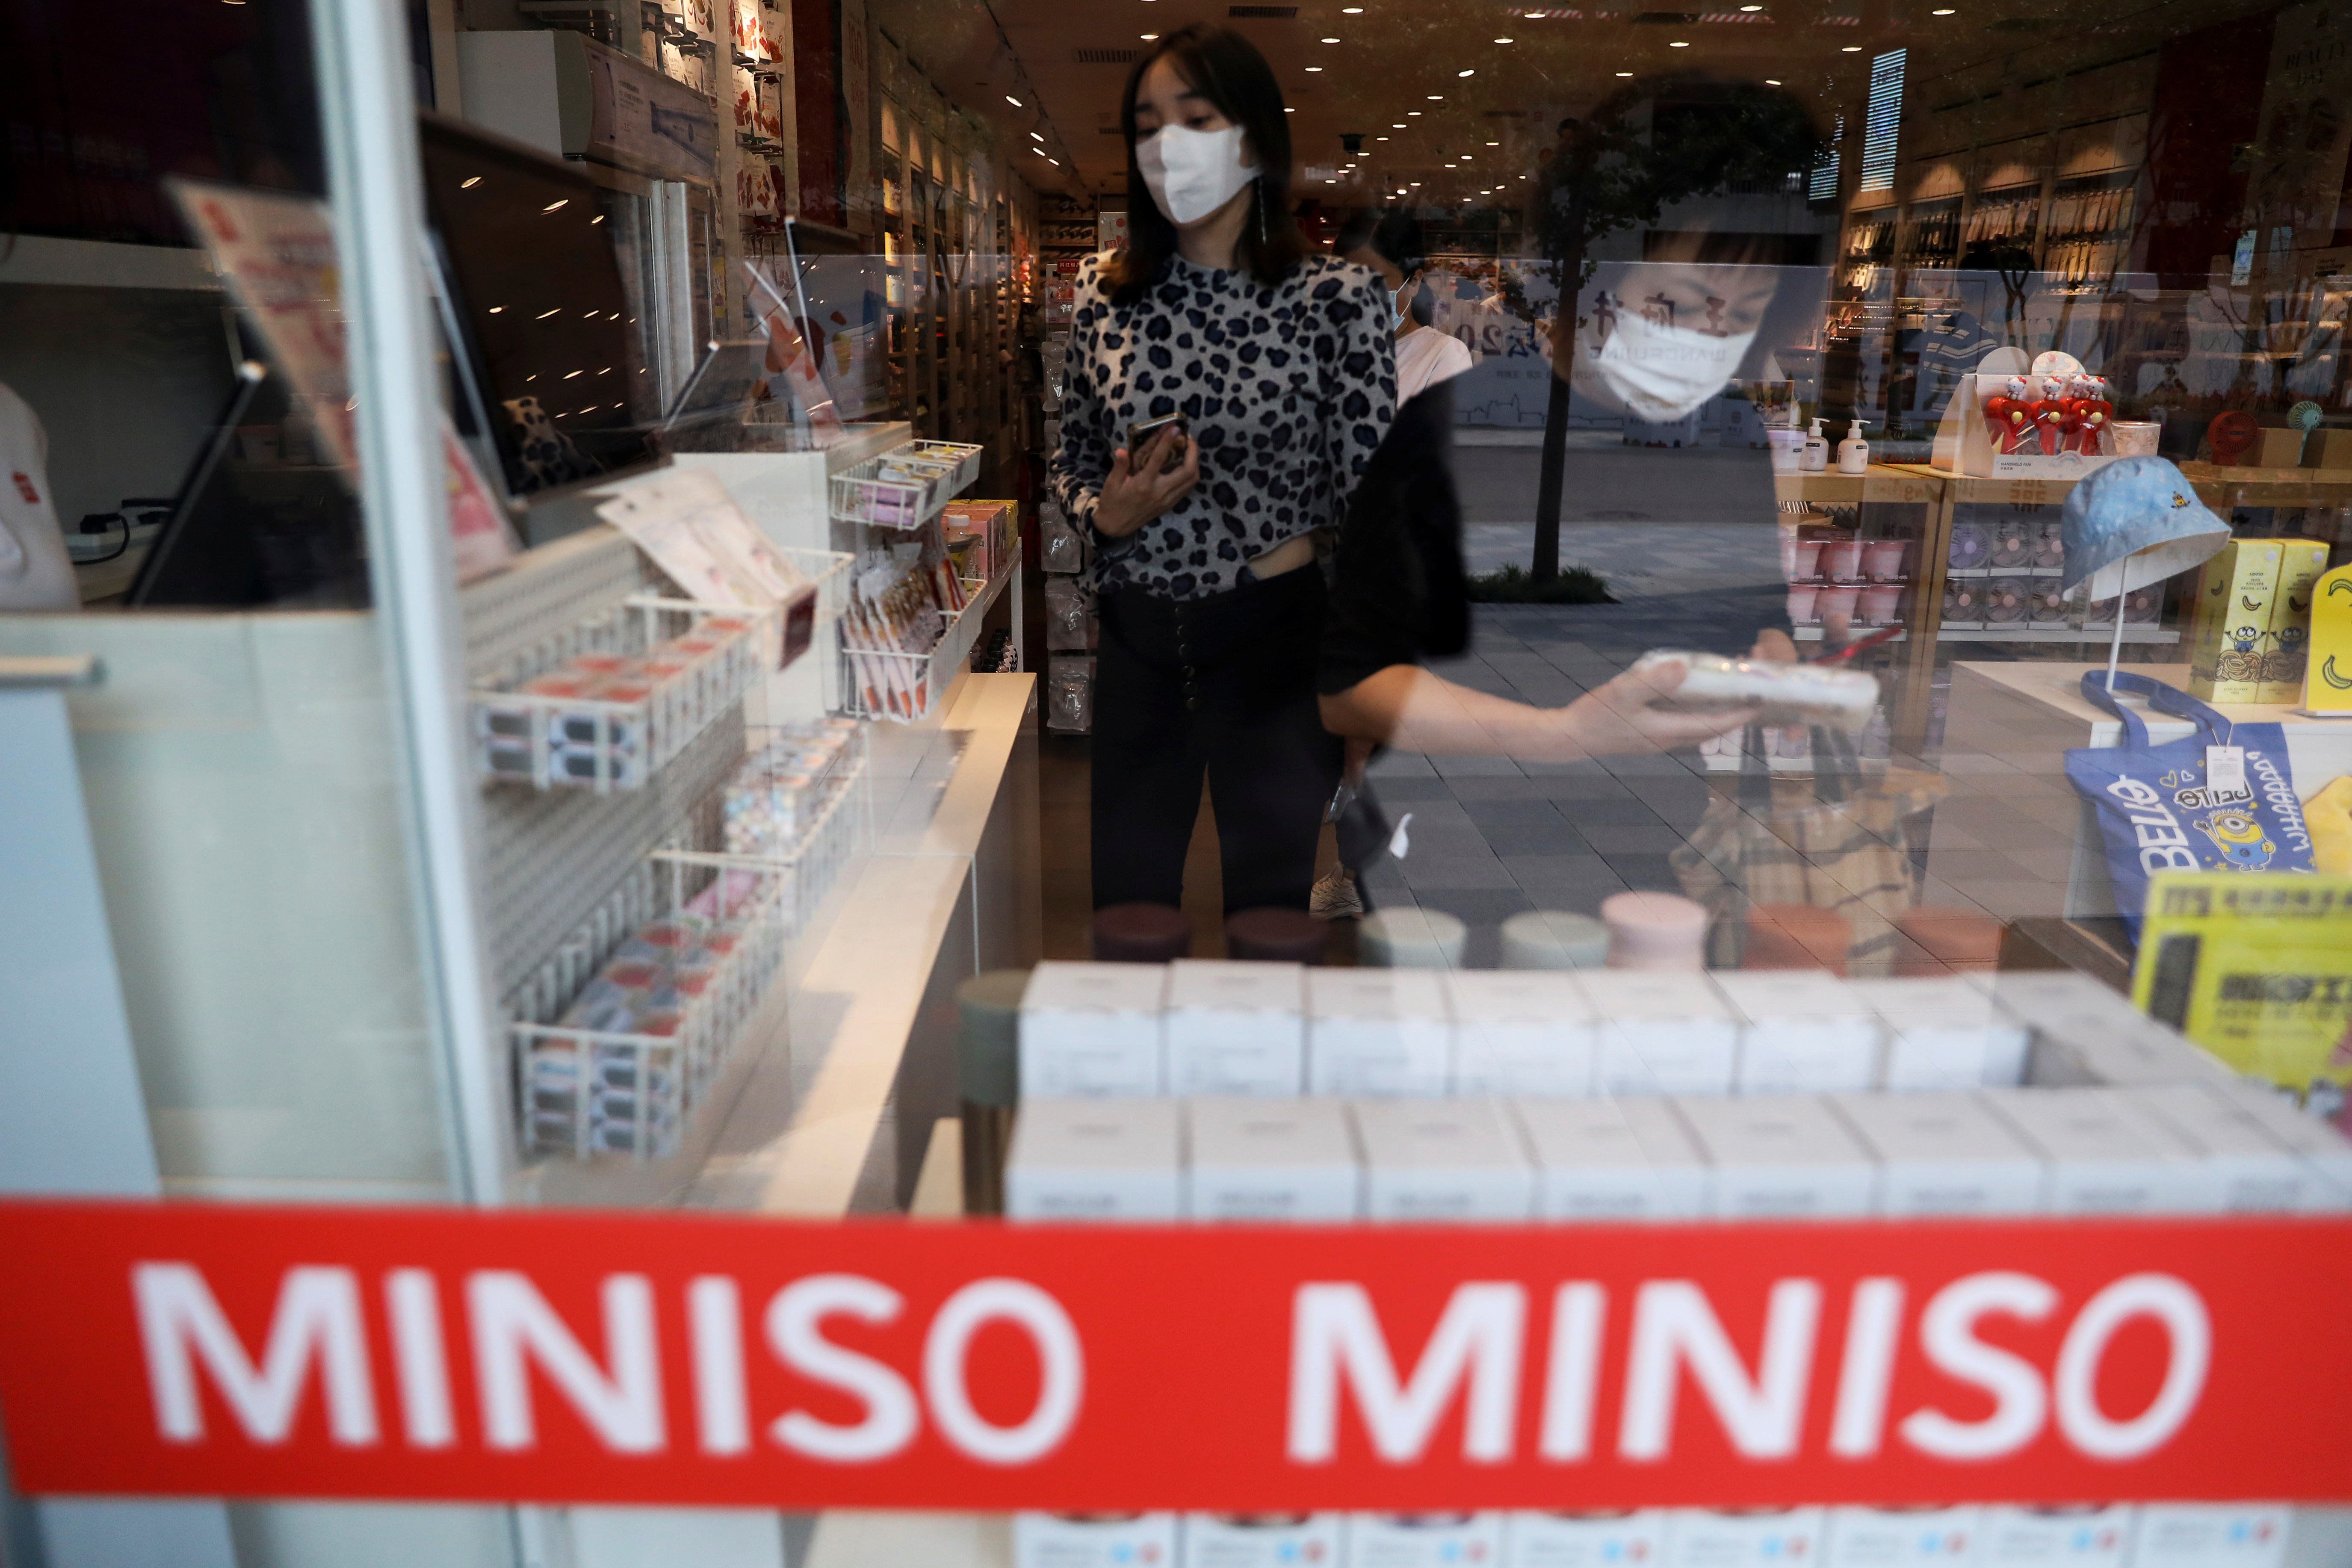 10 N' Under - MINISO Expands in the U.S. and Canada